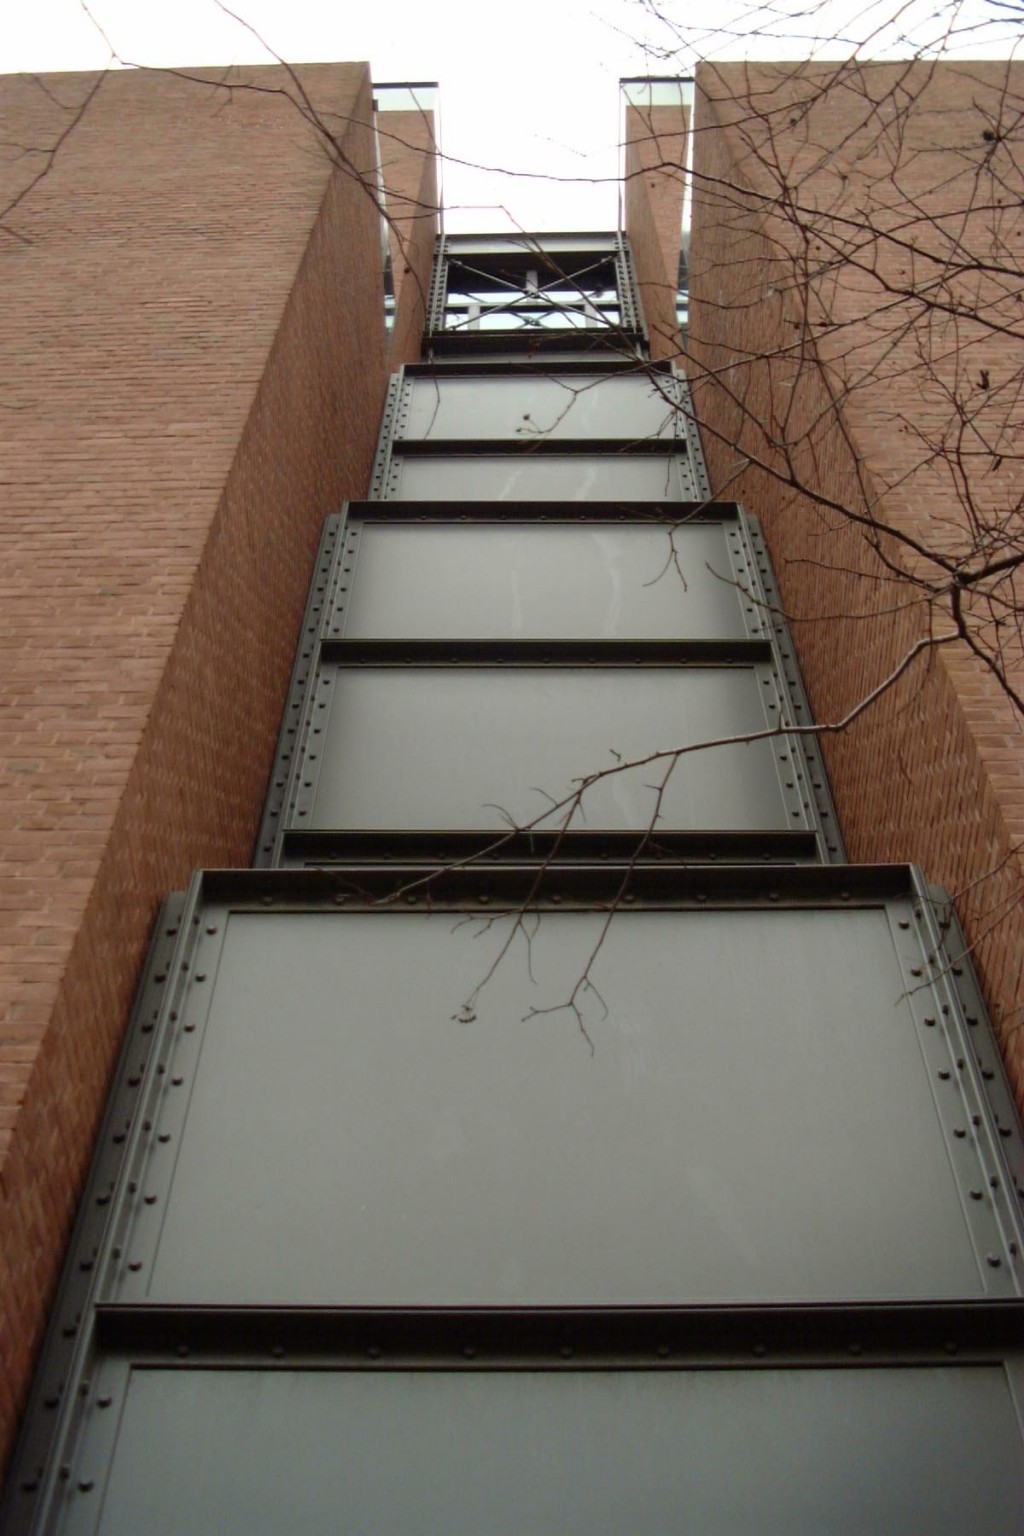 Photograph of exterior wall of the United States Holocaust Memorial Museum. [LCID: wall]